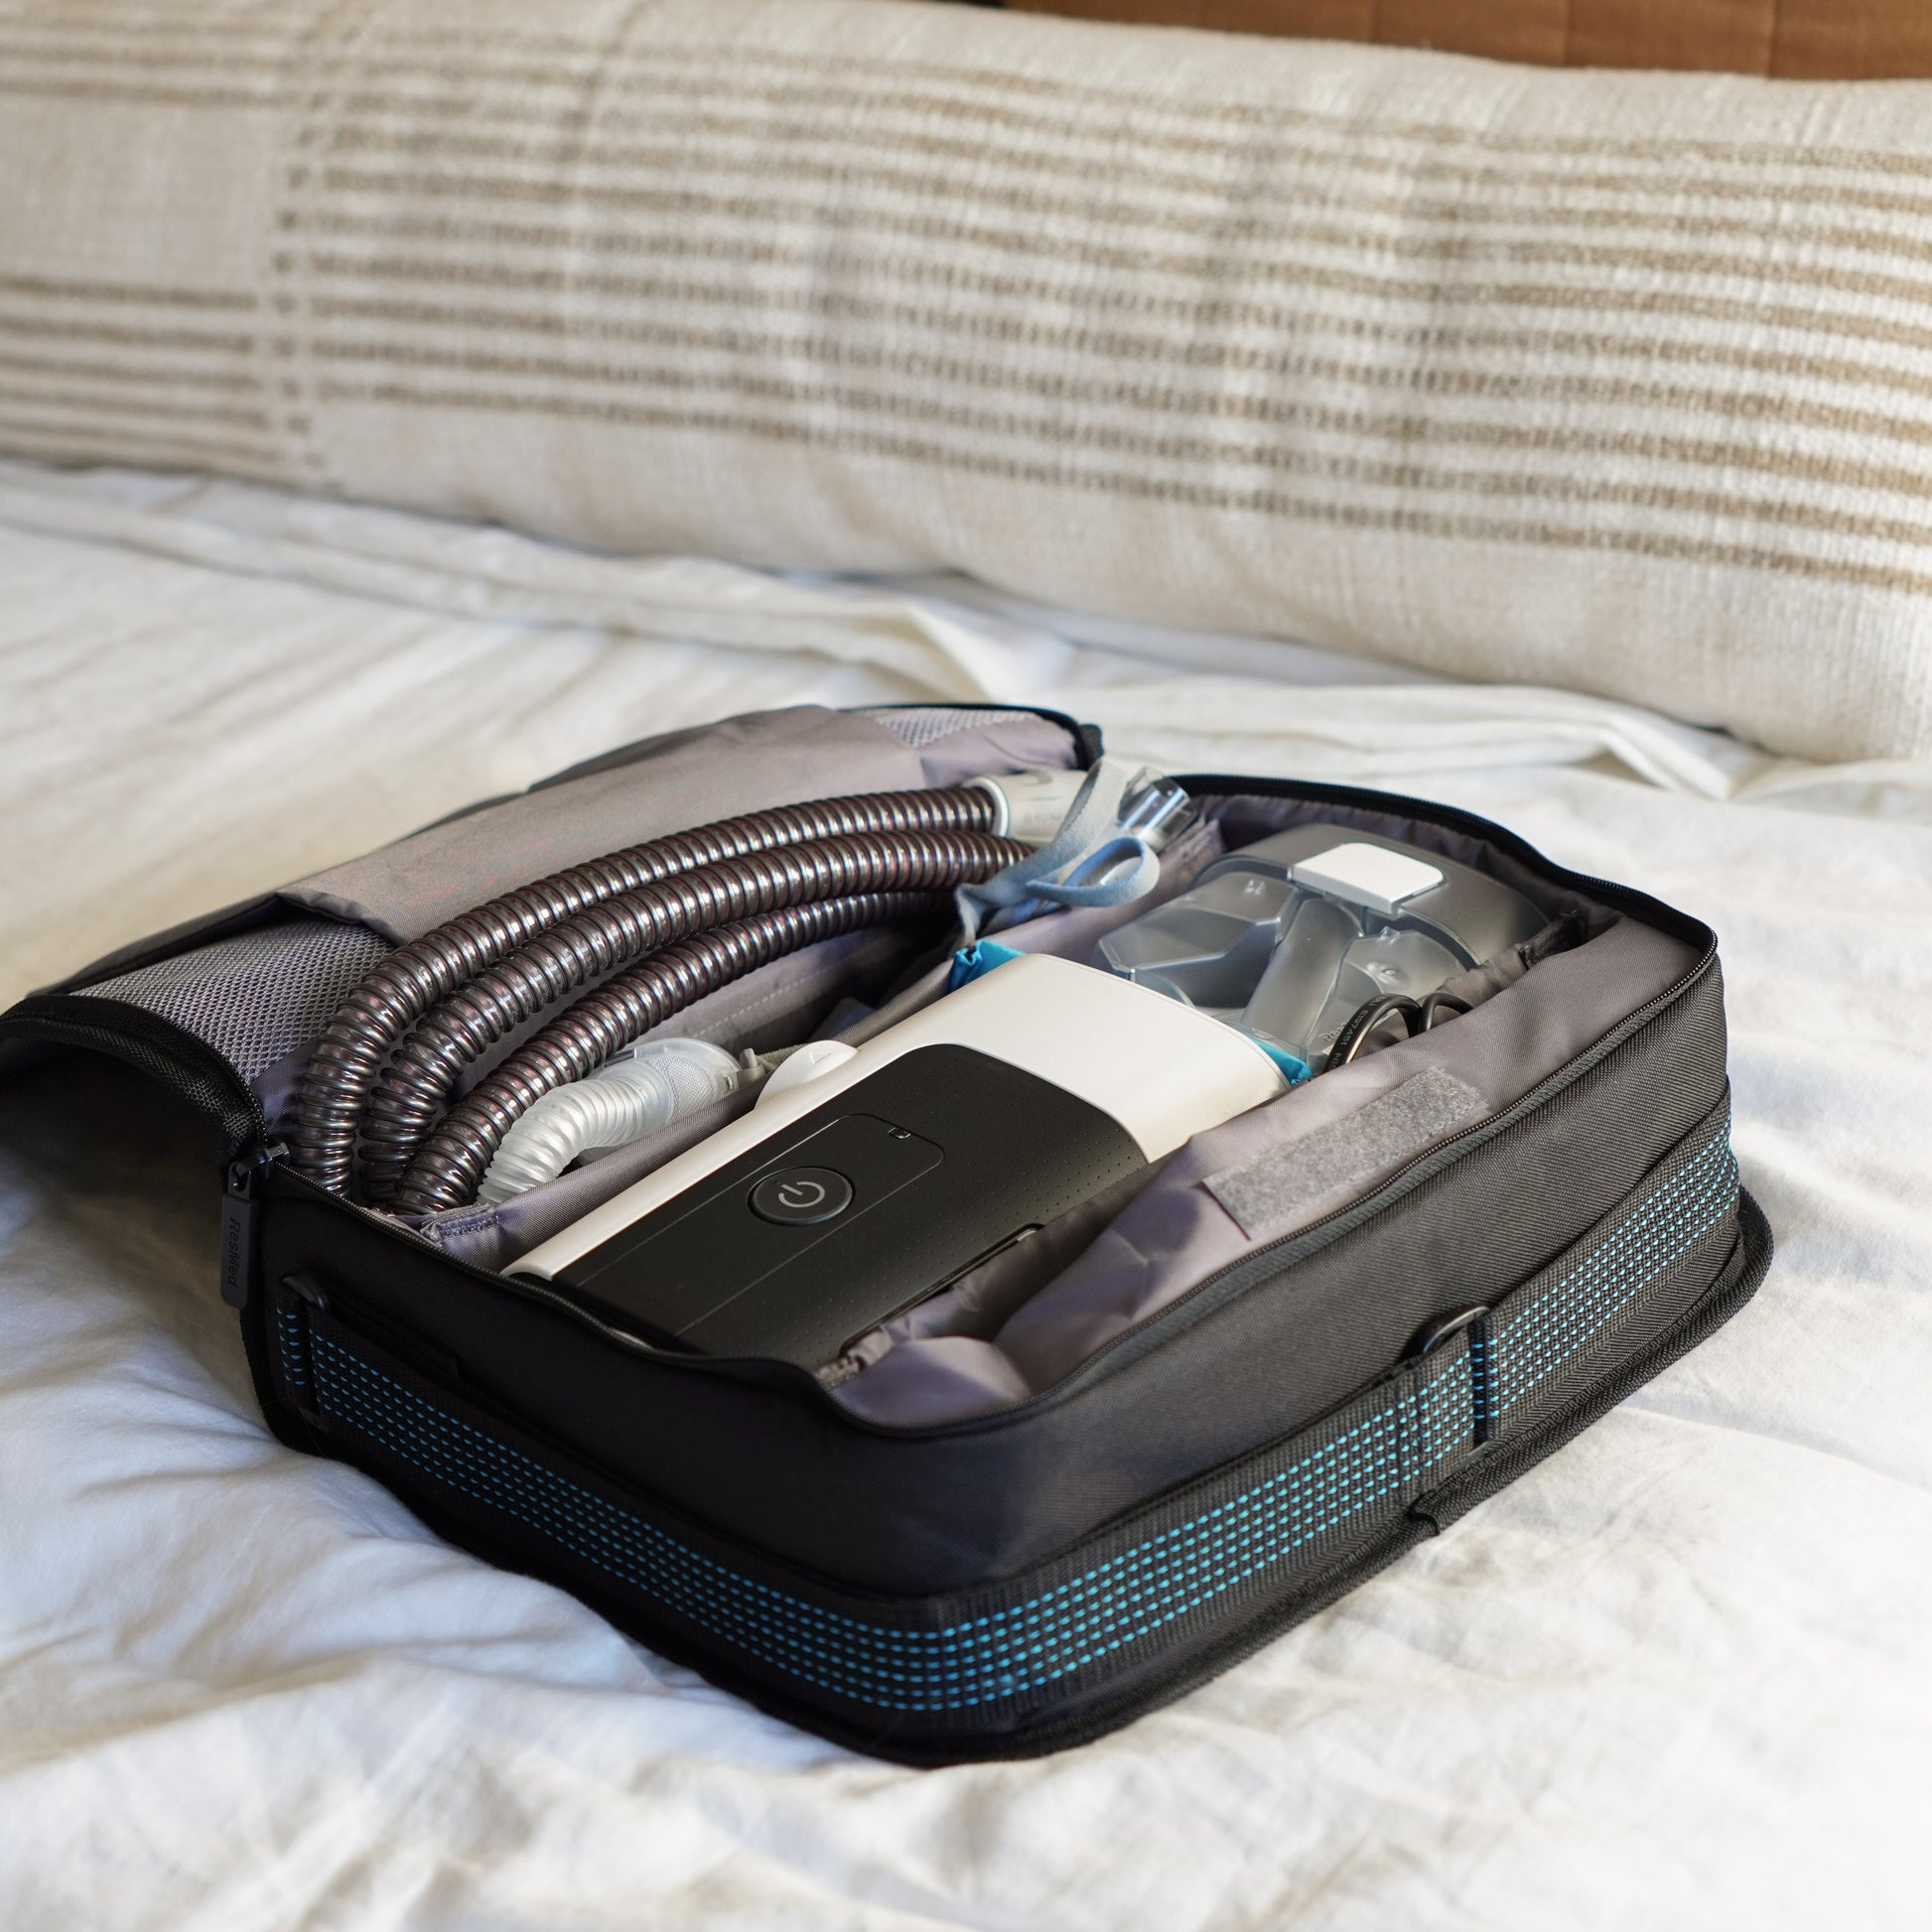 AirSense 11 packed in a travel suitcase, showing portability and small form factor